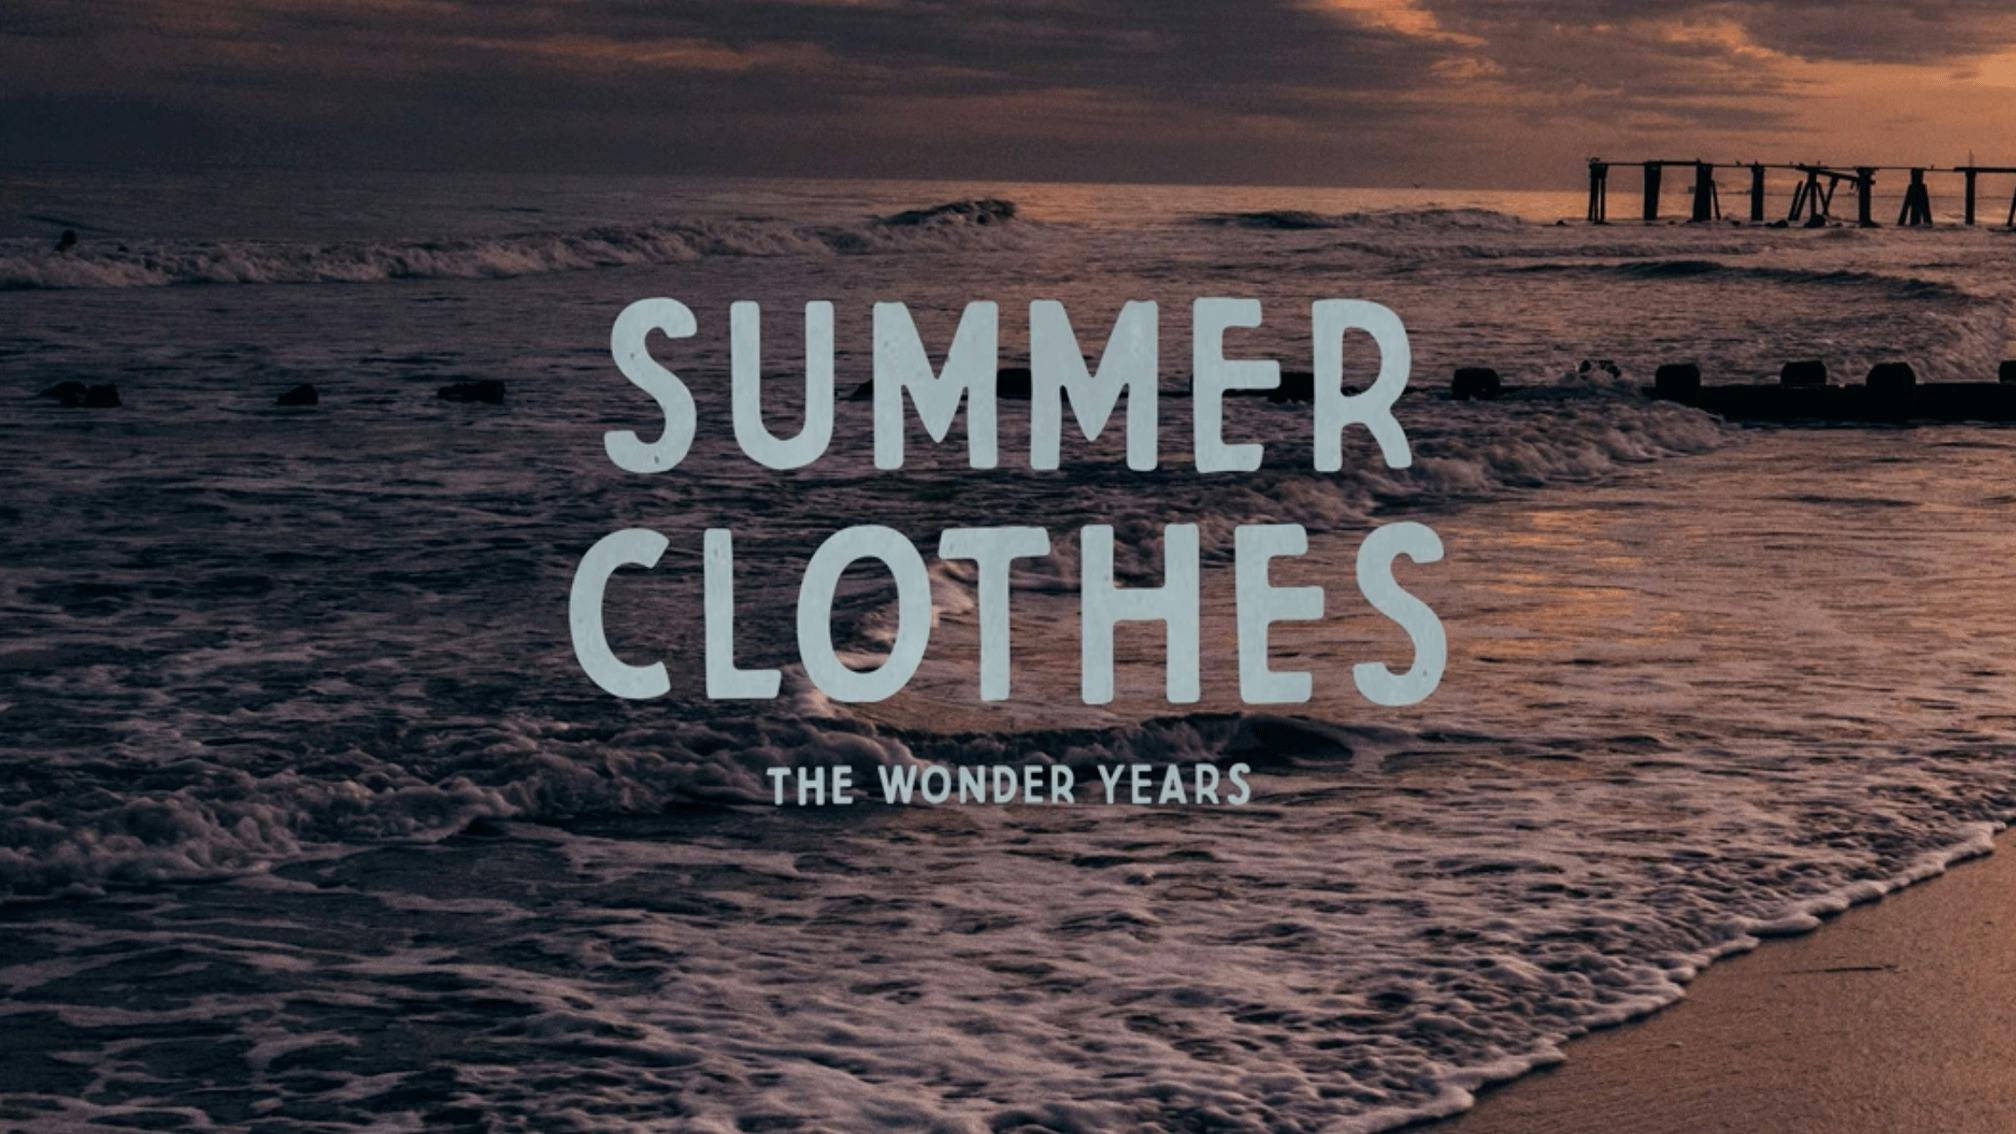 Listen to The Wonder Years’ beautiful new single Summer Clothes